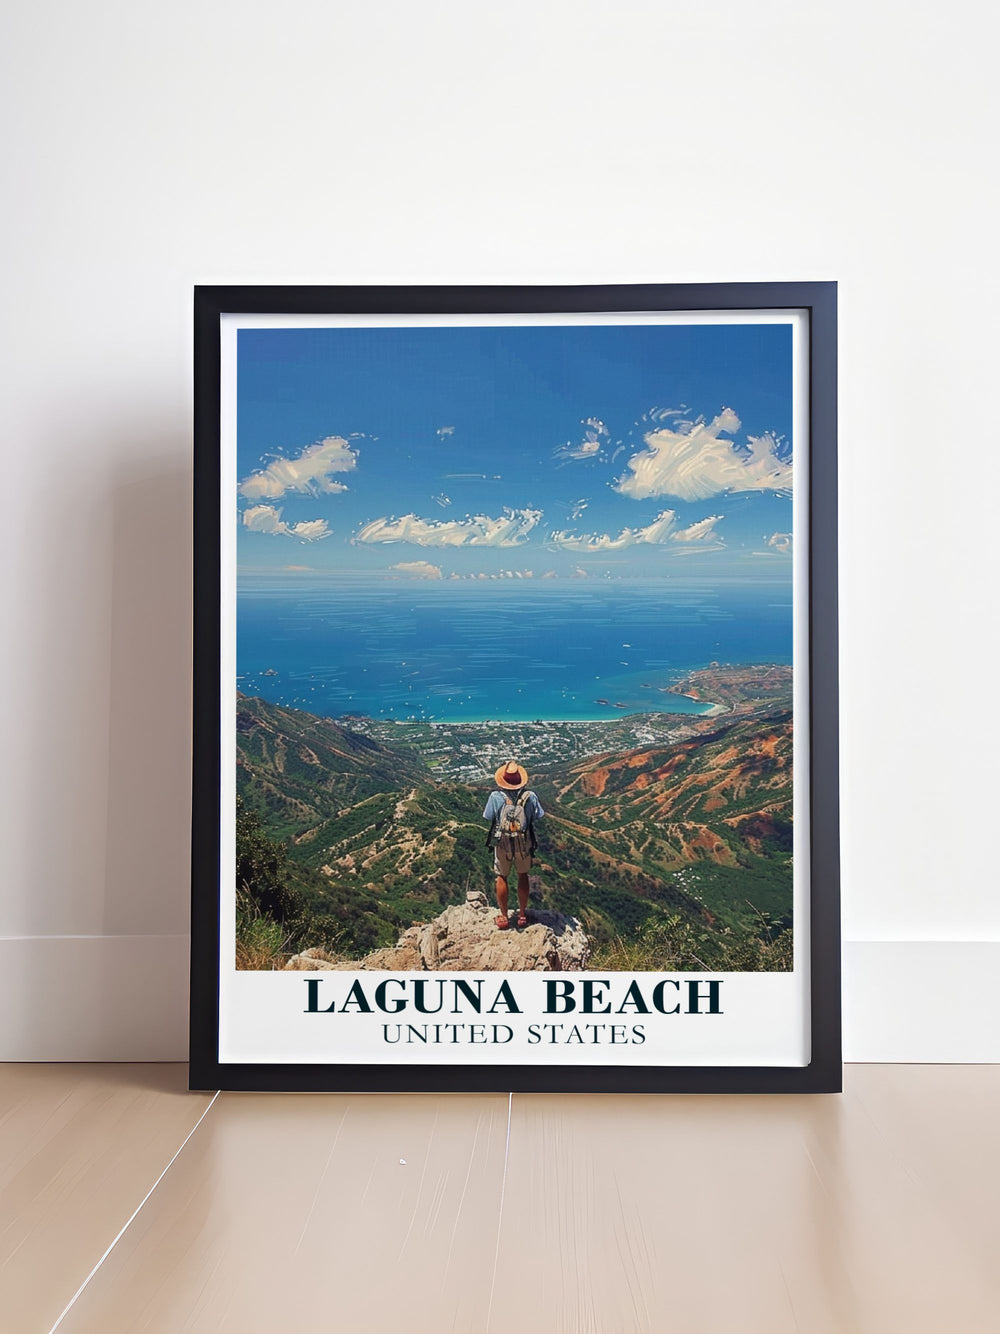 Colorful Laguna Beach Poster with Top of the World scene is a stunning piece of artwork that brings the beauty of Laguna Beach into your home perfect for gifts and wall decor.